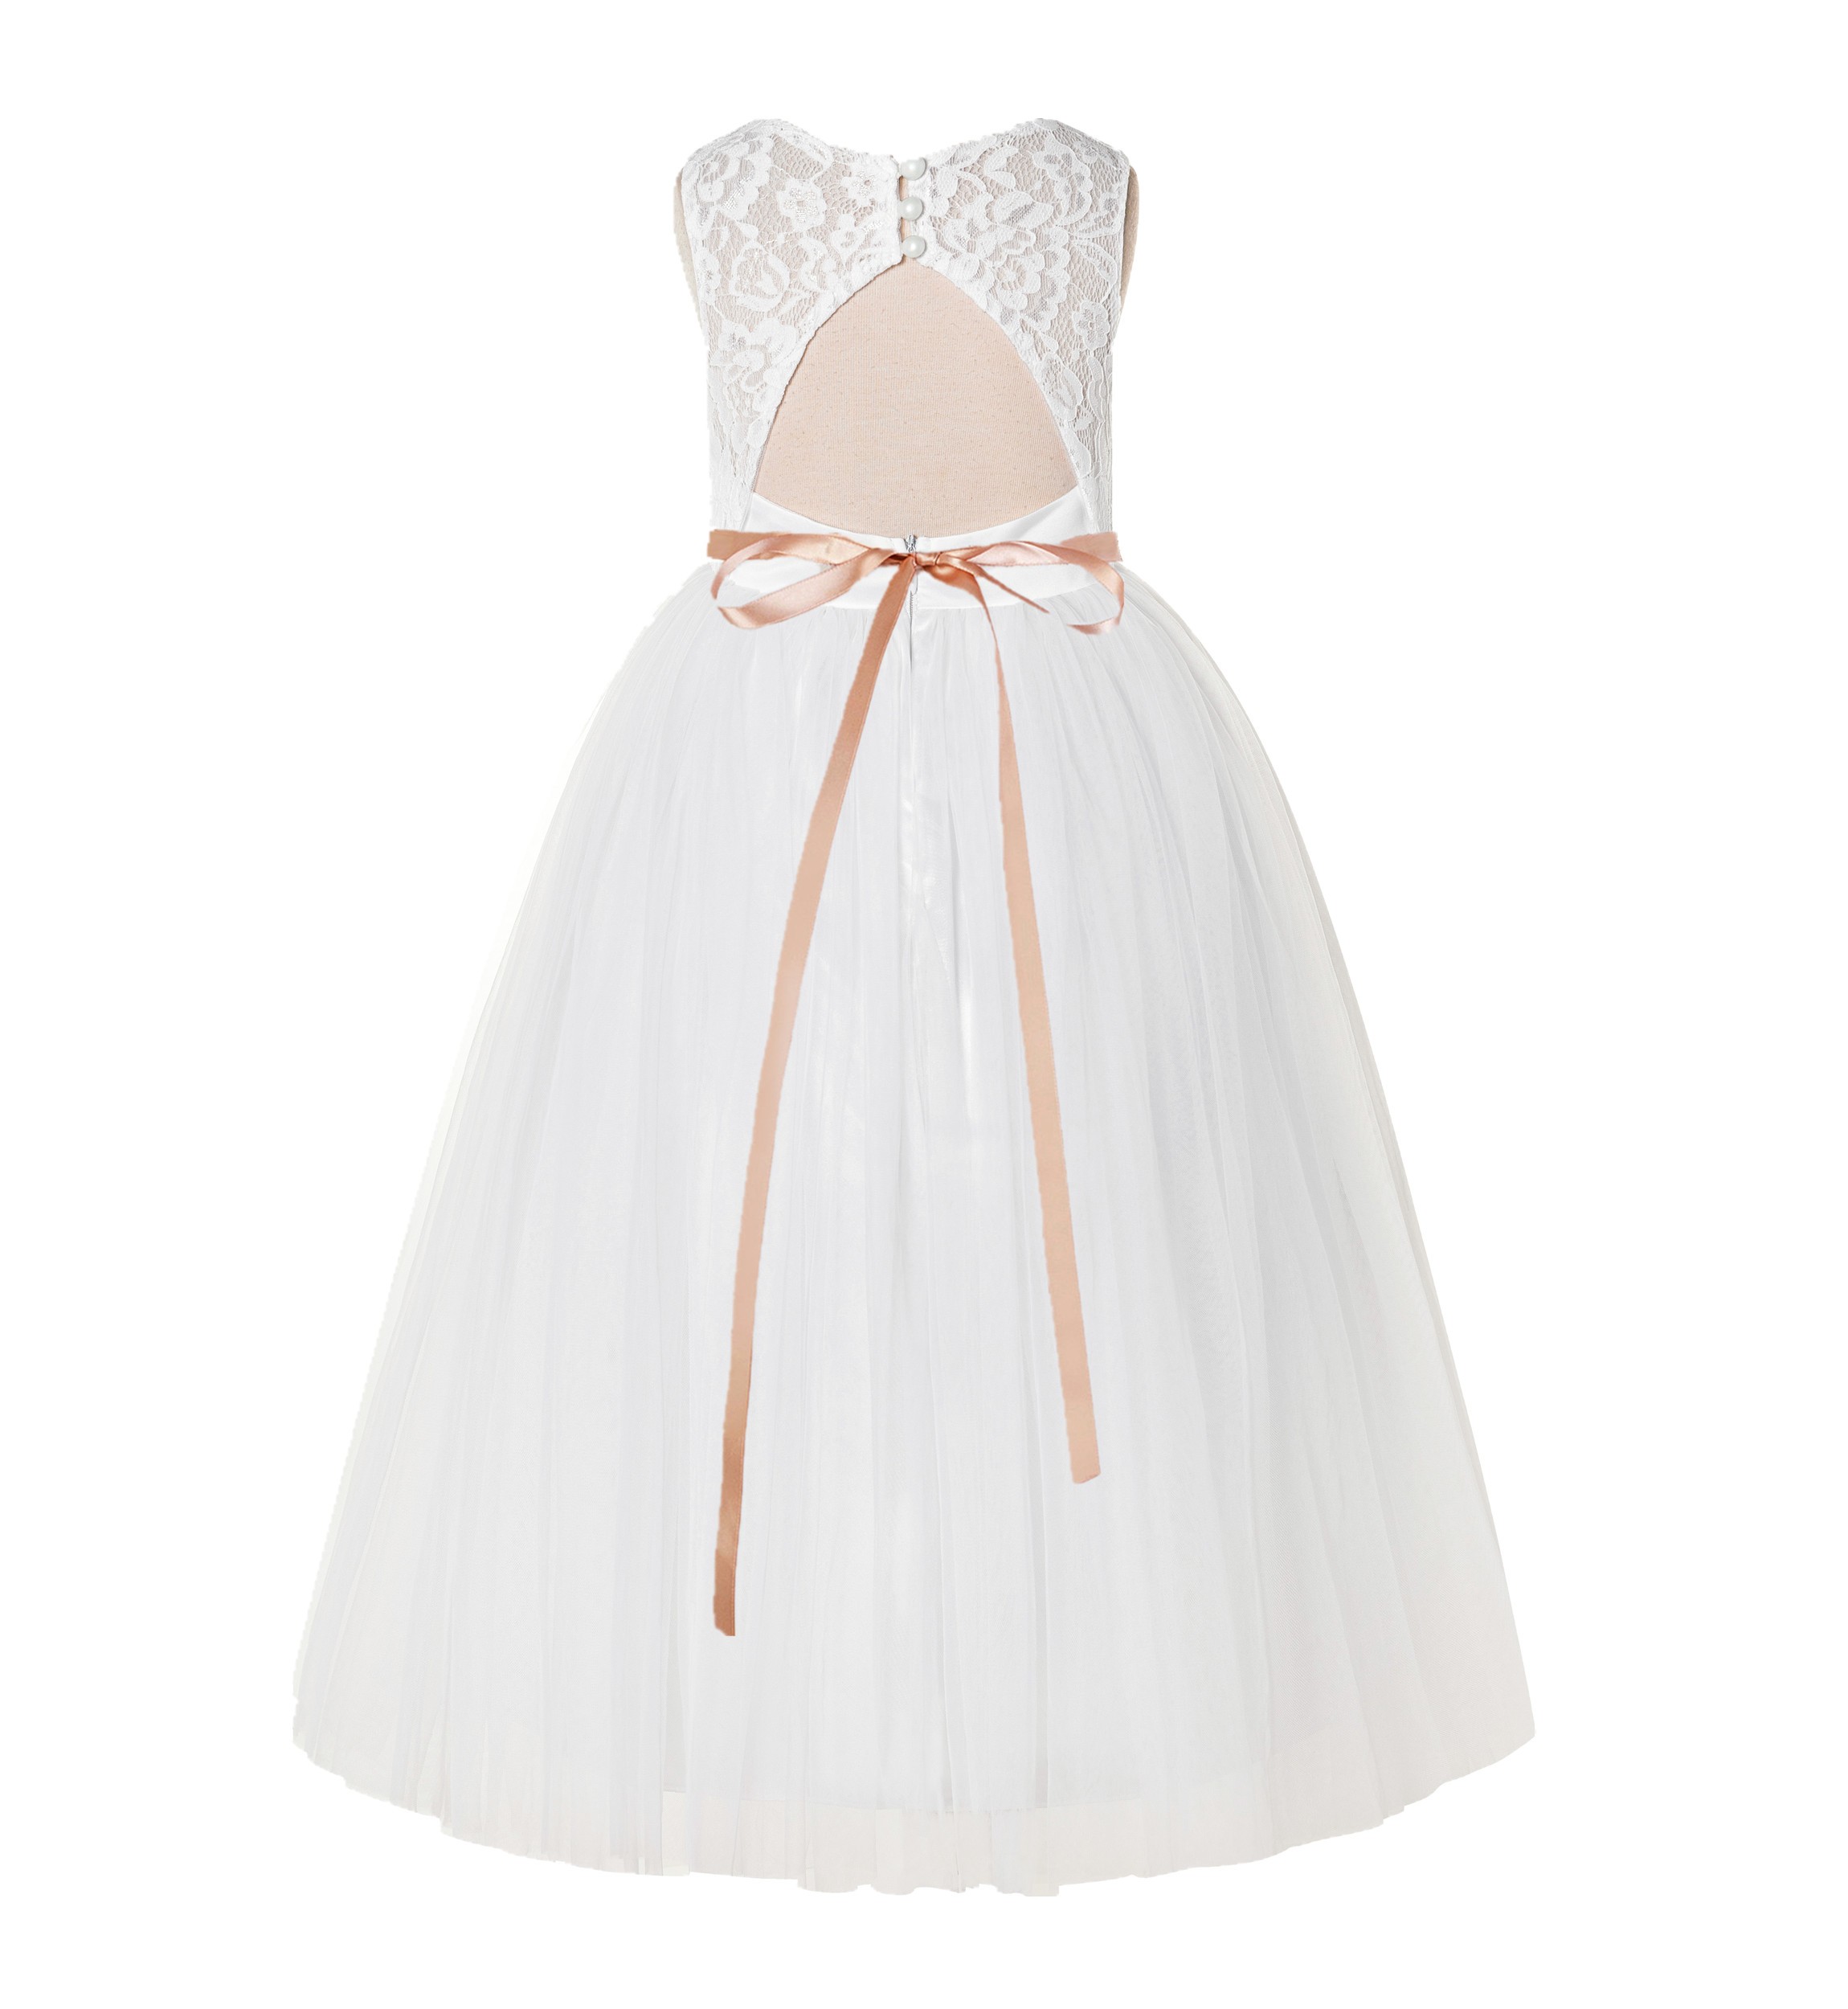 Ivory / Rose Gold A-Line Tulle Lace Flower Girl Dress 178R4